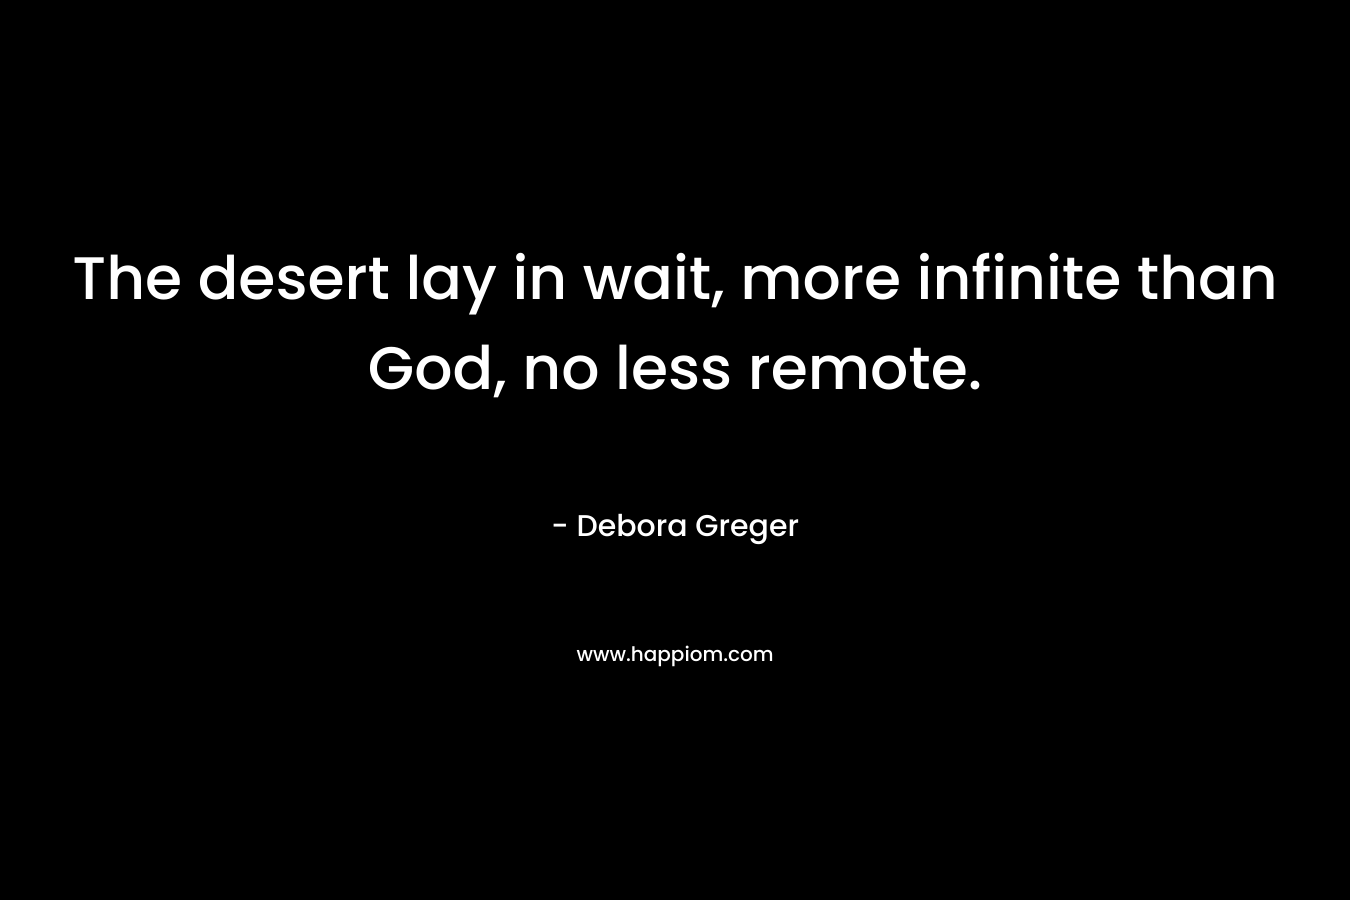 The desert lay in wait, more infinite than God, no less remote.